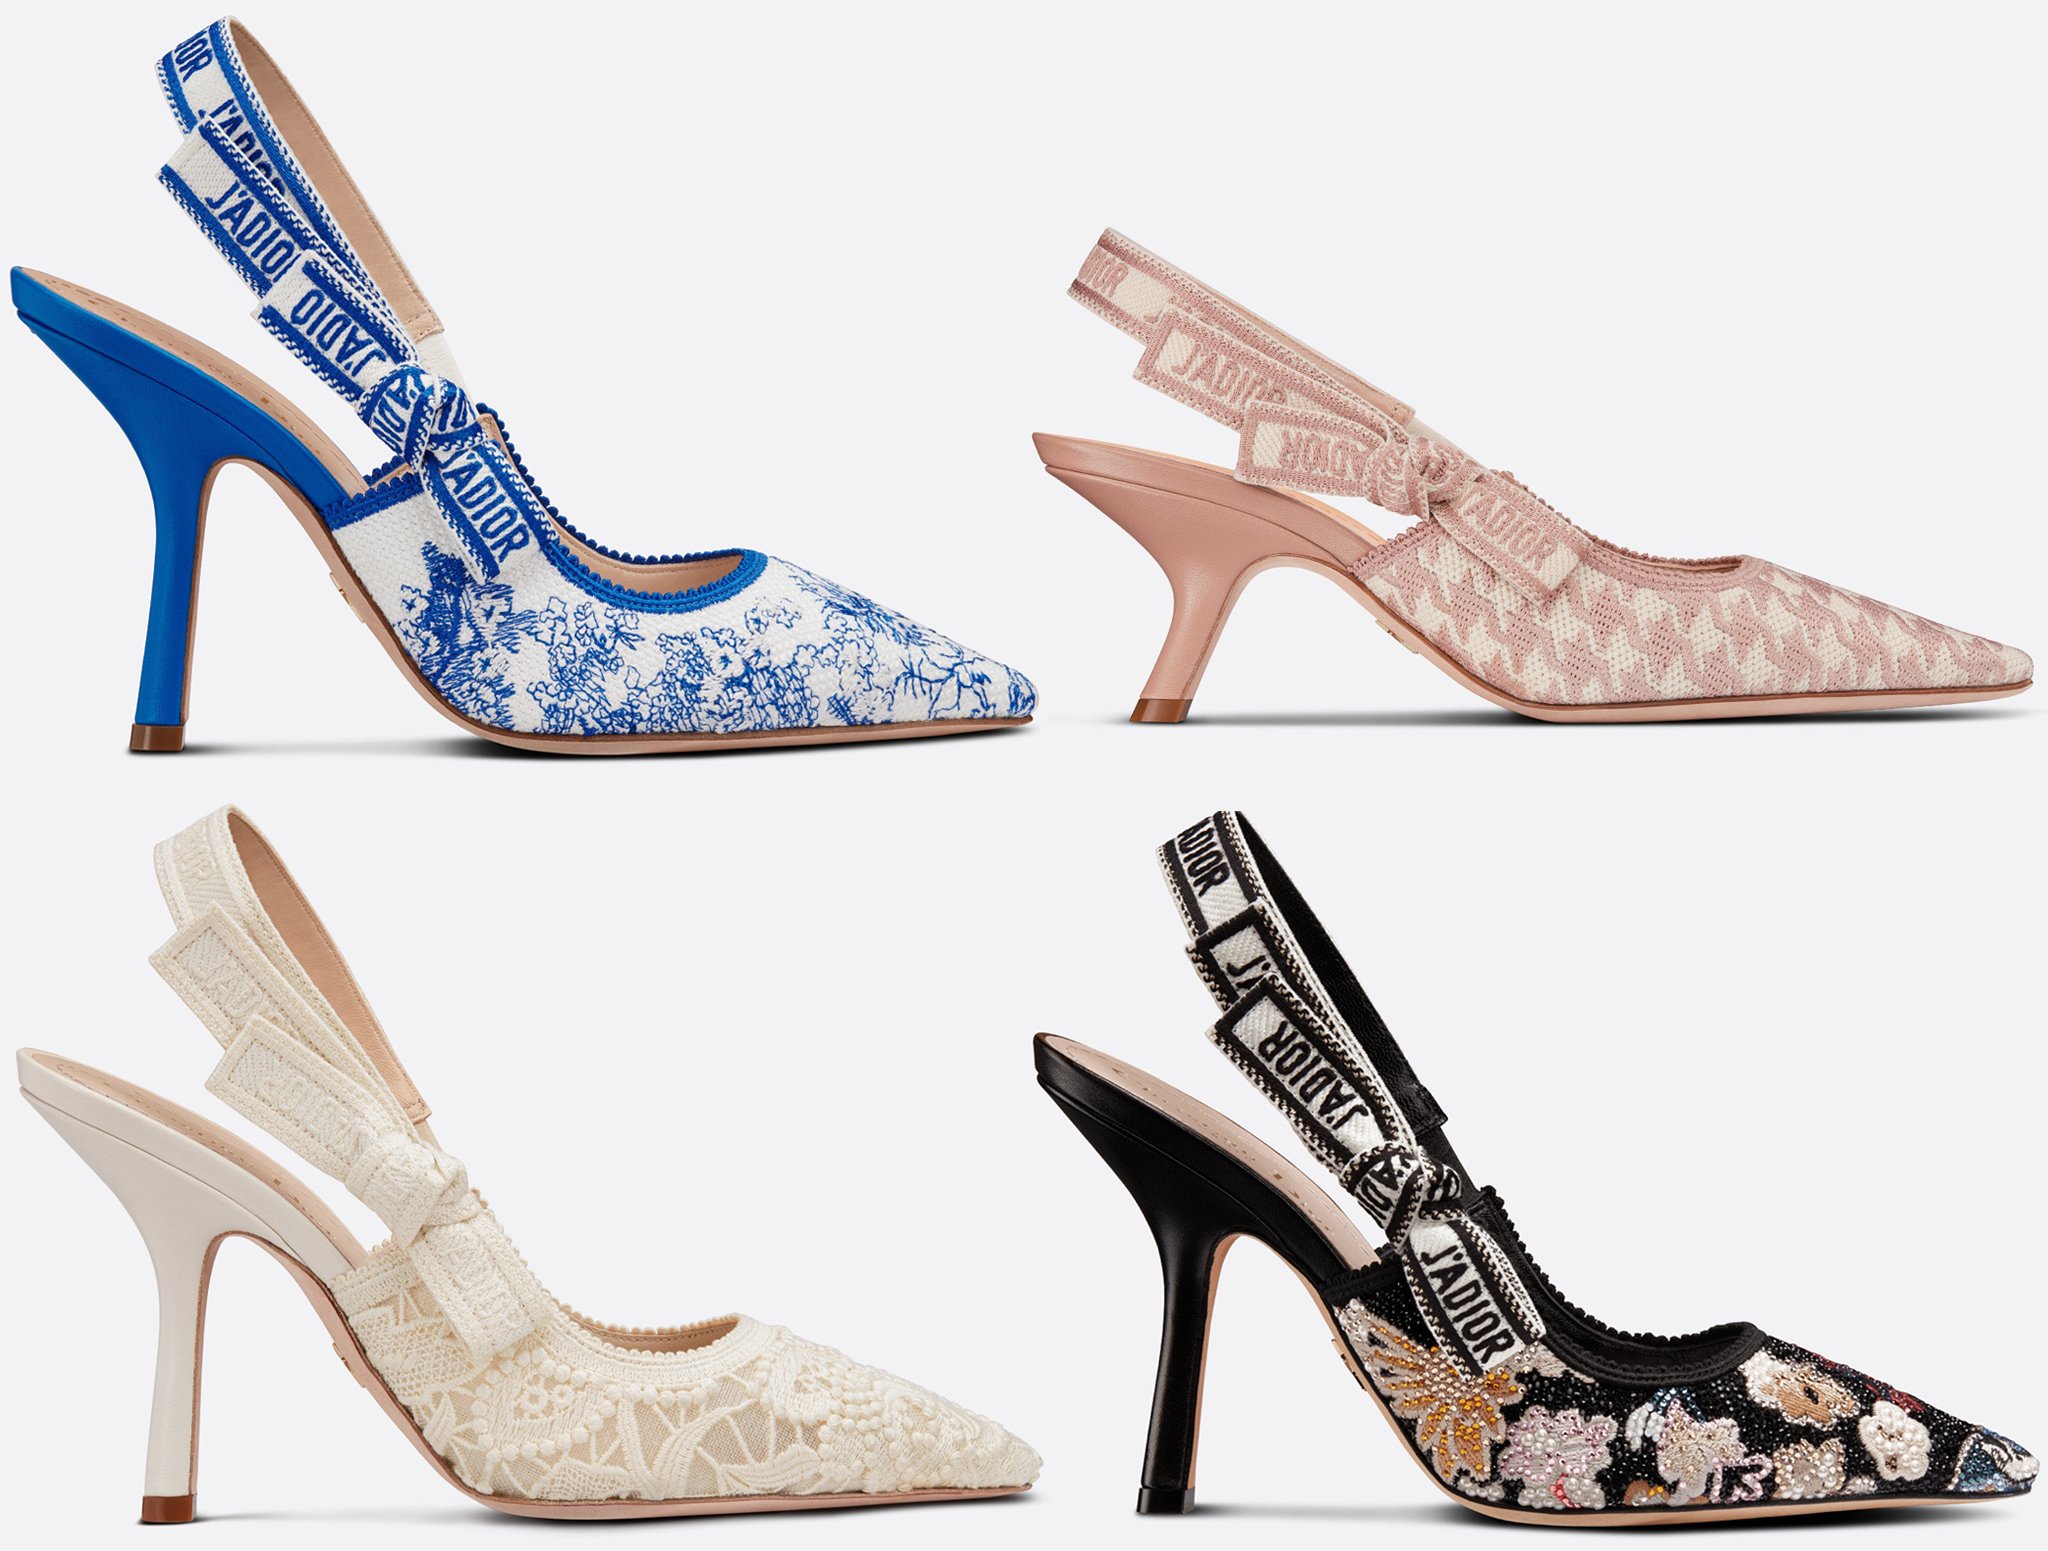 The celebrity-favorite J'Adore slingback pumps come in a variety of seasonal colors, prints, and patterns